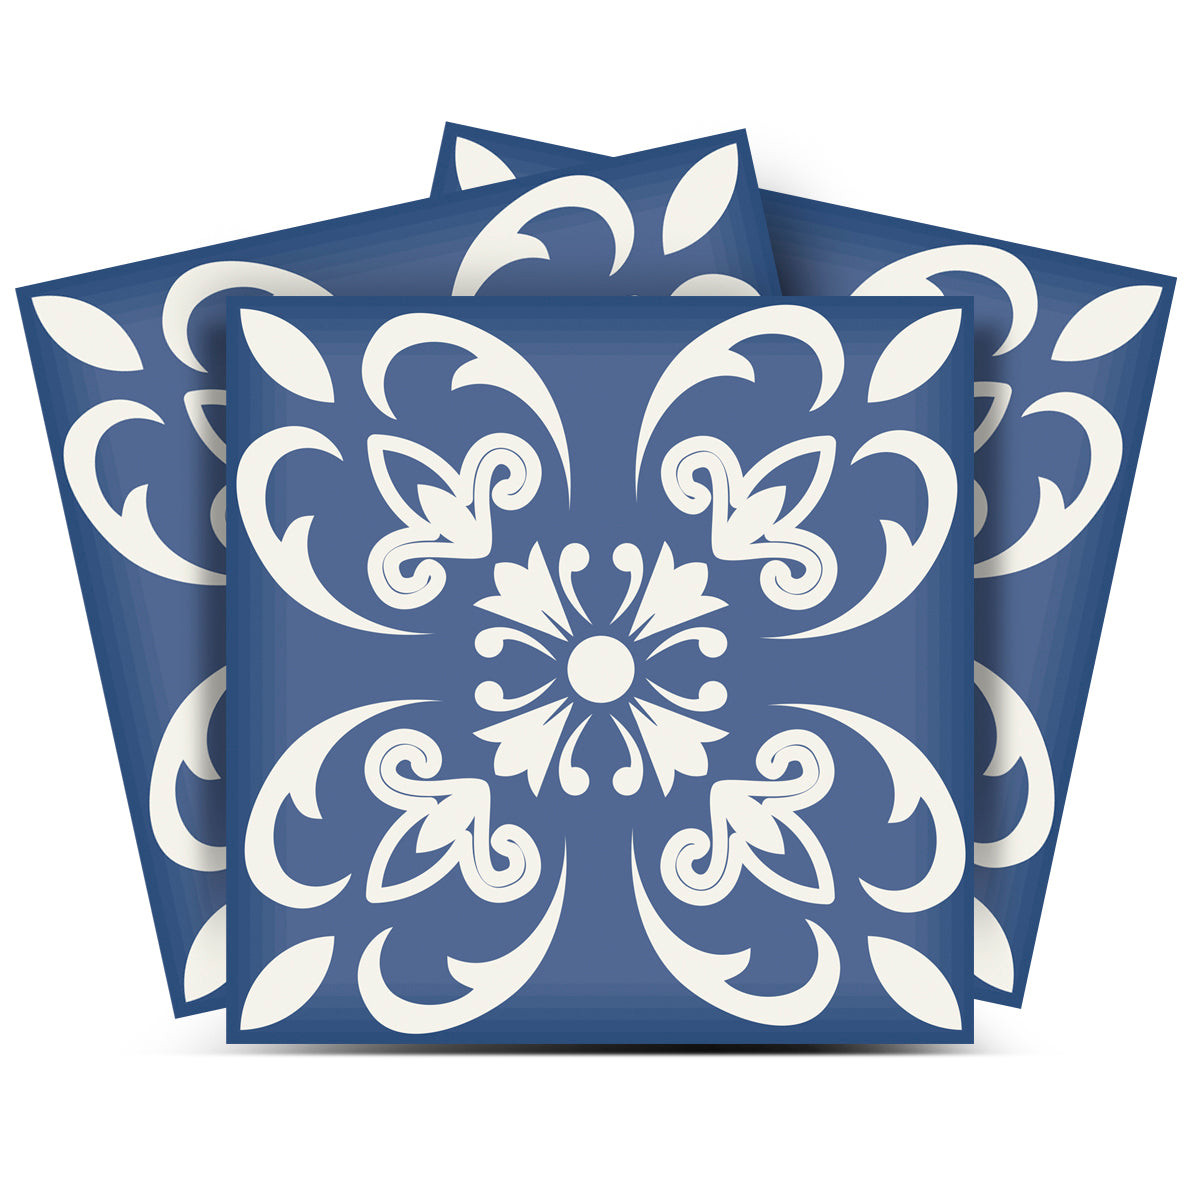 4" X 4" Wedgwood Blue And White Peel And Stick Removable Tiles-390888-1